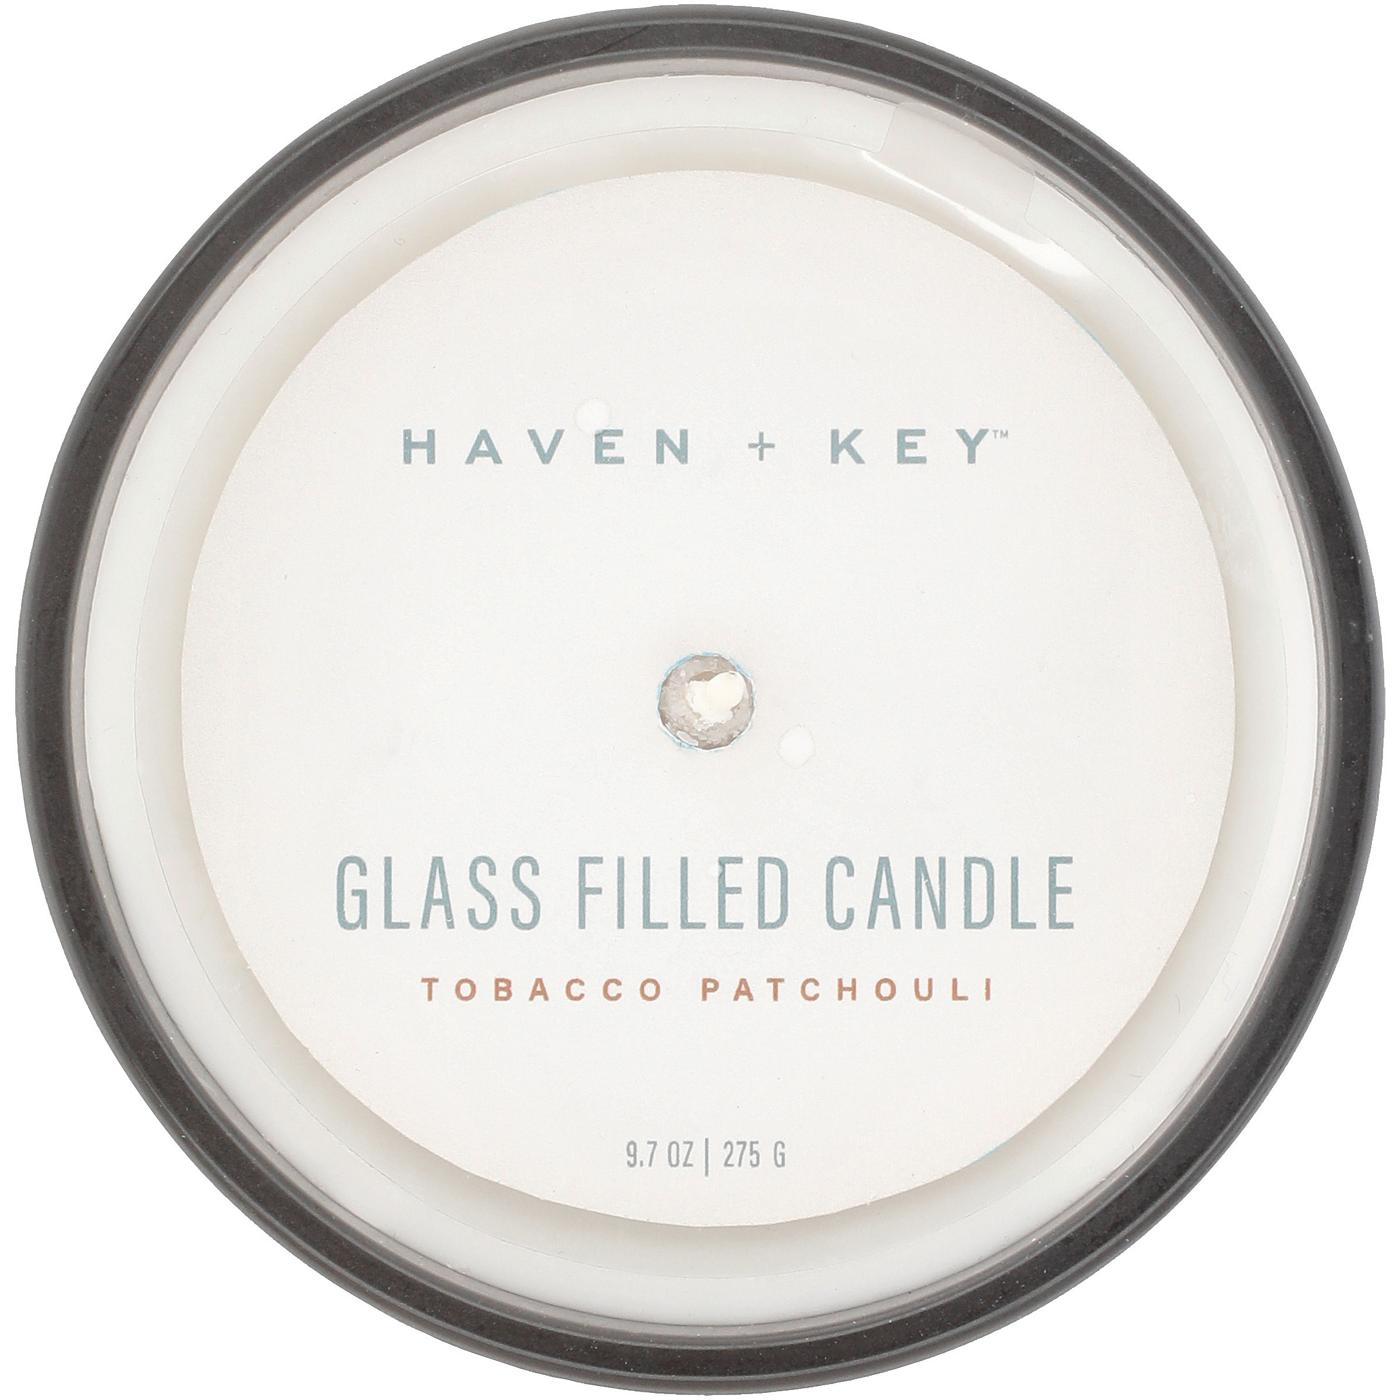 Haven + Key Tobacco & Patchouli Scented Candle; image 2 of 2